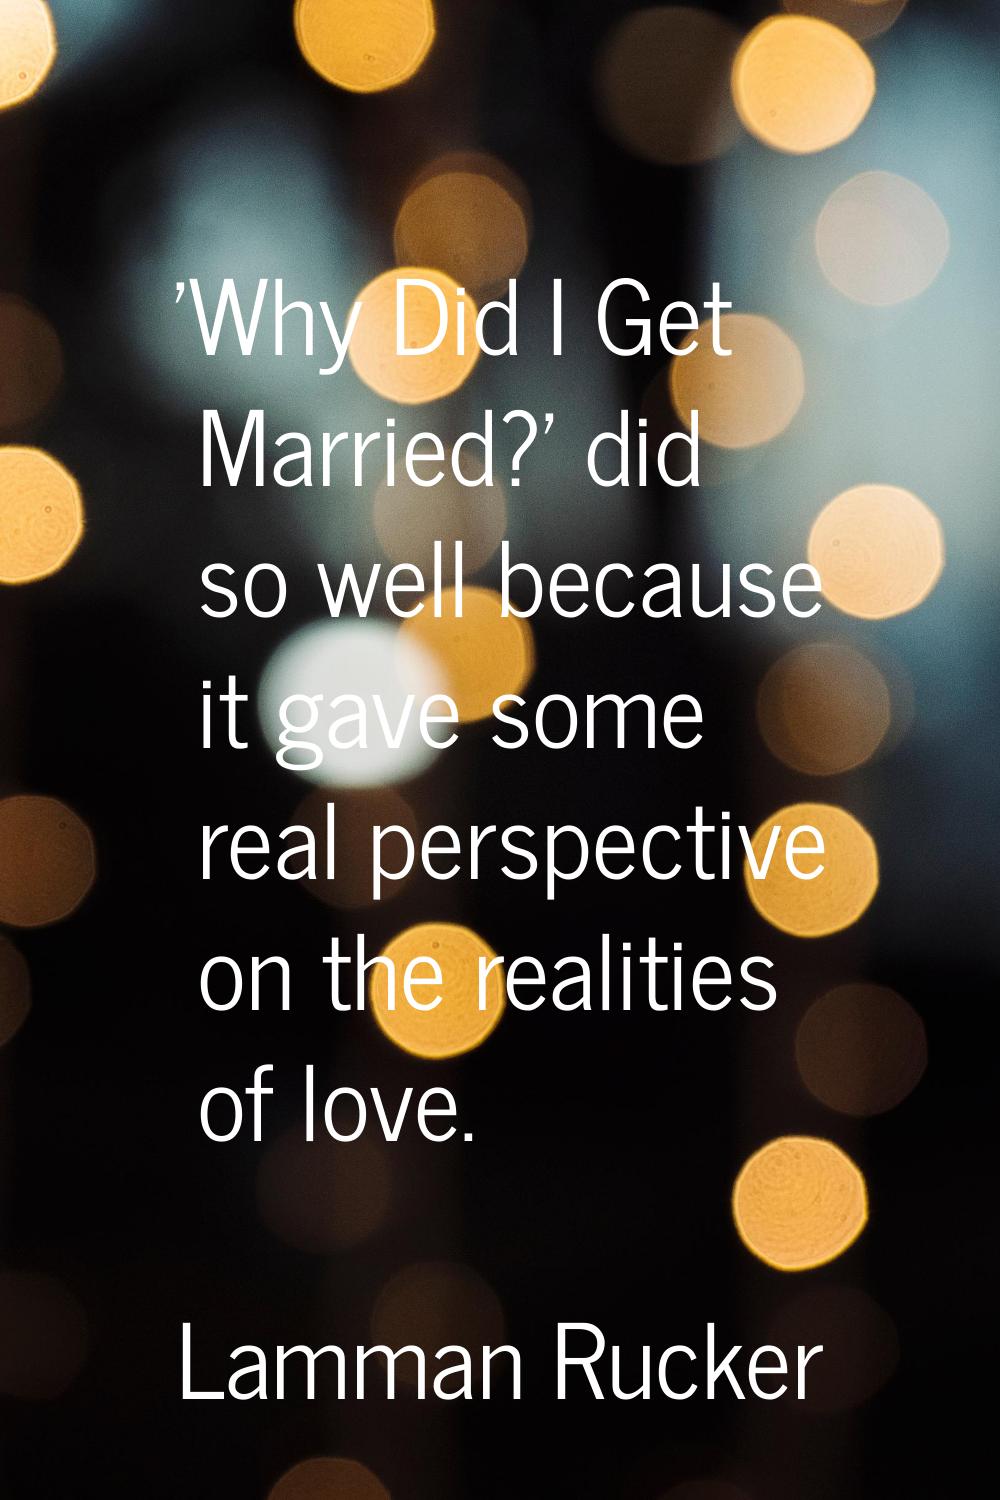 'Why Did I Get Married?' did so well because it gave some real perspective on the realities of love